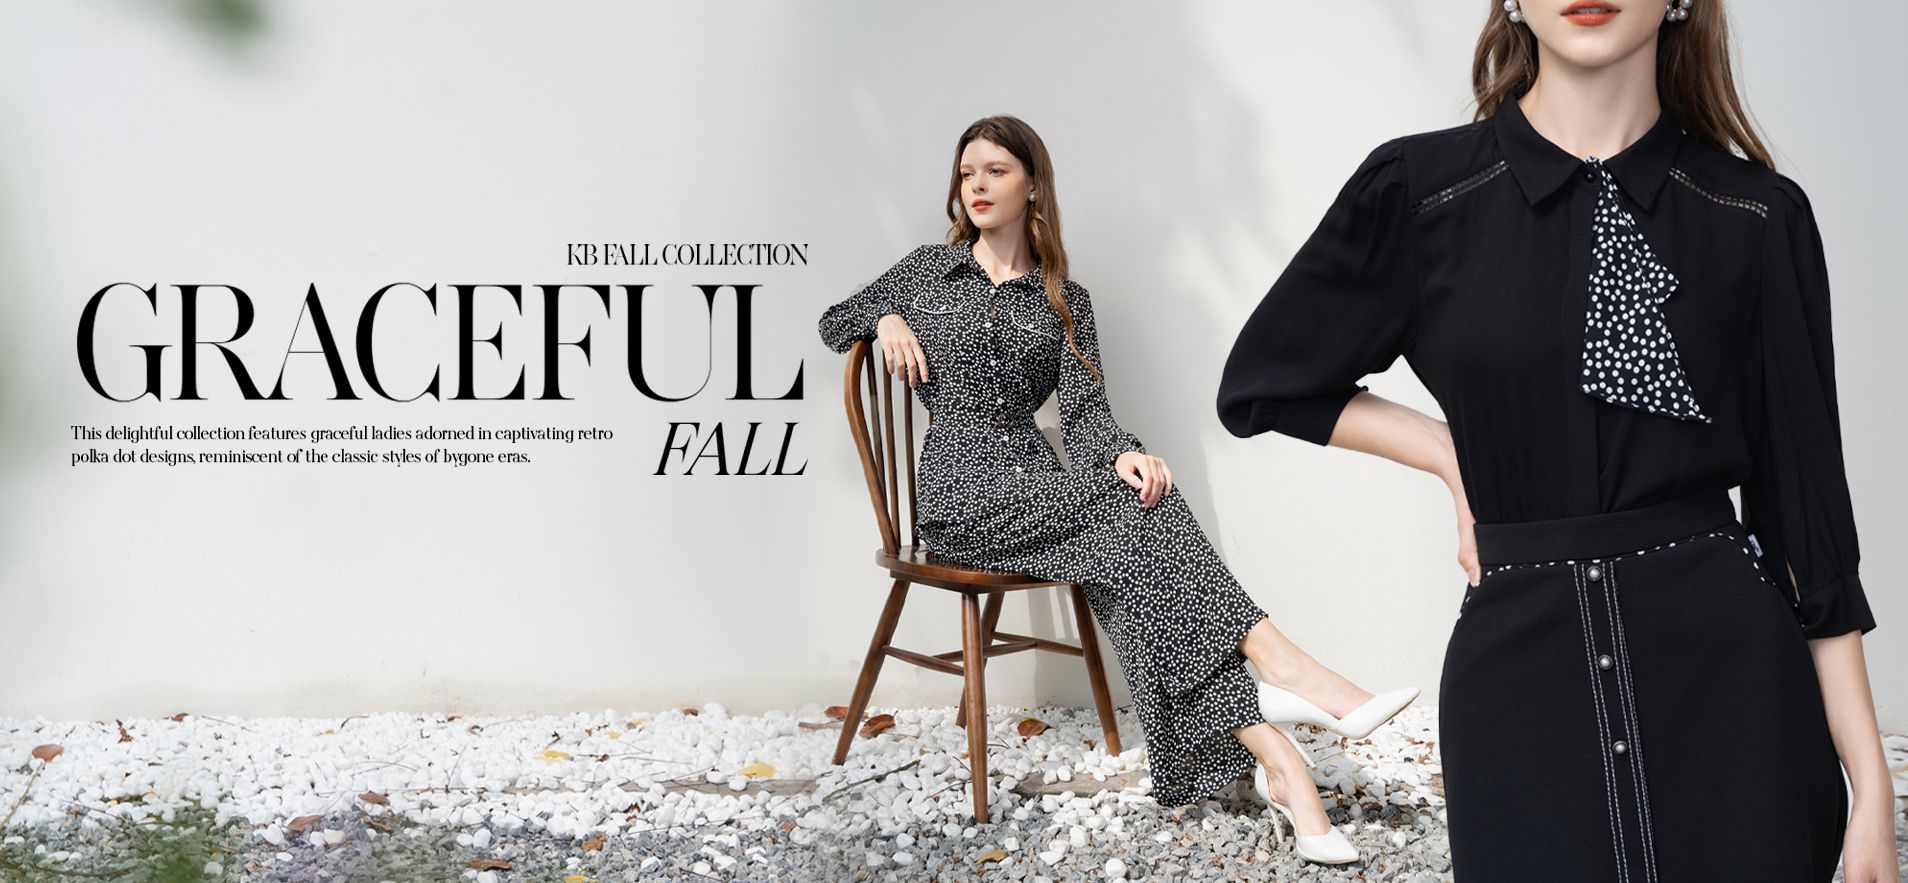 GRACEFUL FALL COLLECTION